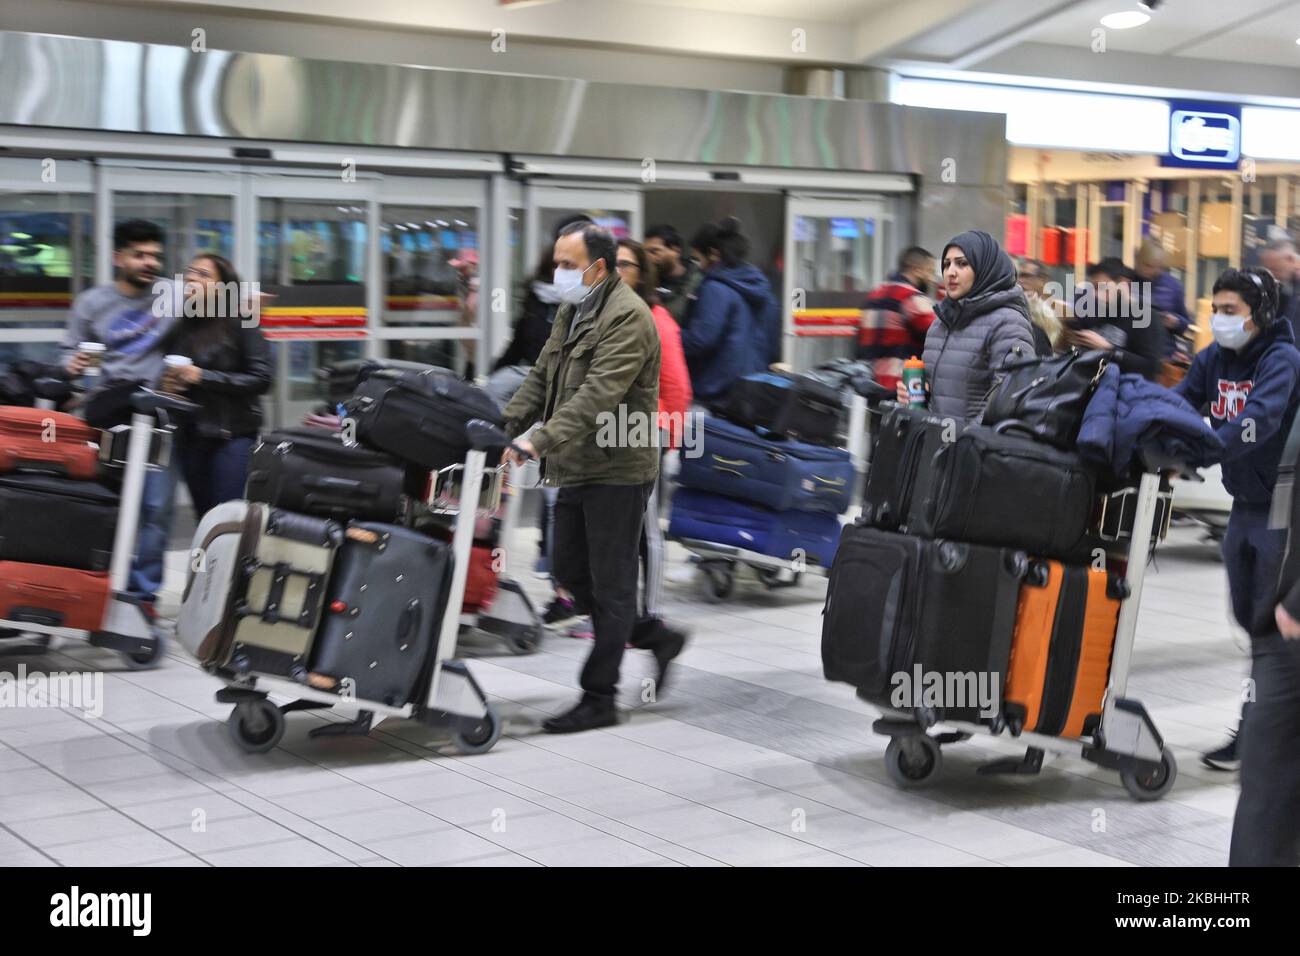 Passengers at Pearson International Airport in Ontario, Canada. Some passangers are wearing masks to protect from the novel coronavirus (COVID-19). Pearson International Airport is Canada's largest and busiest airport. (Photo by Creative Touch Imaging Ltd./NurPhoto) Stock Photo